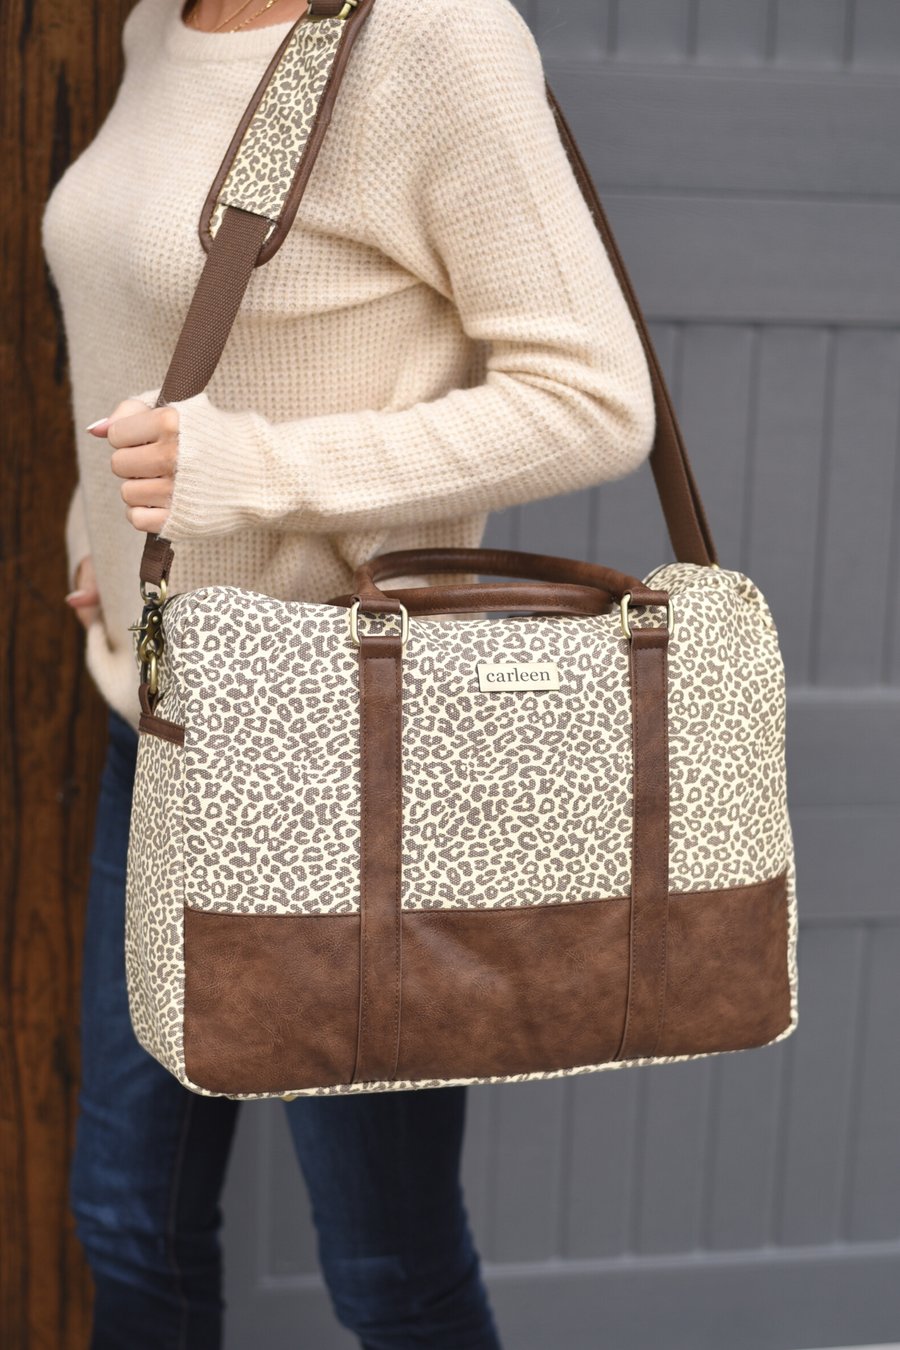 Down to Business Canvas Camera Bag - Leopard